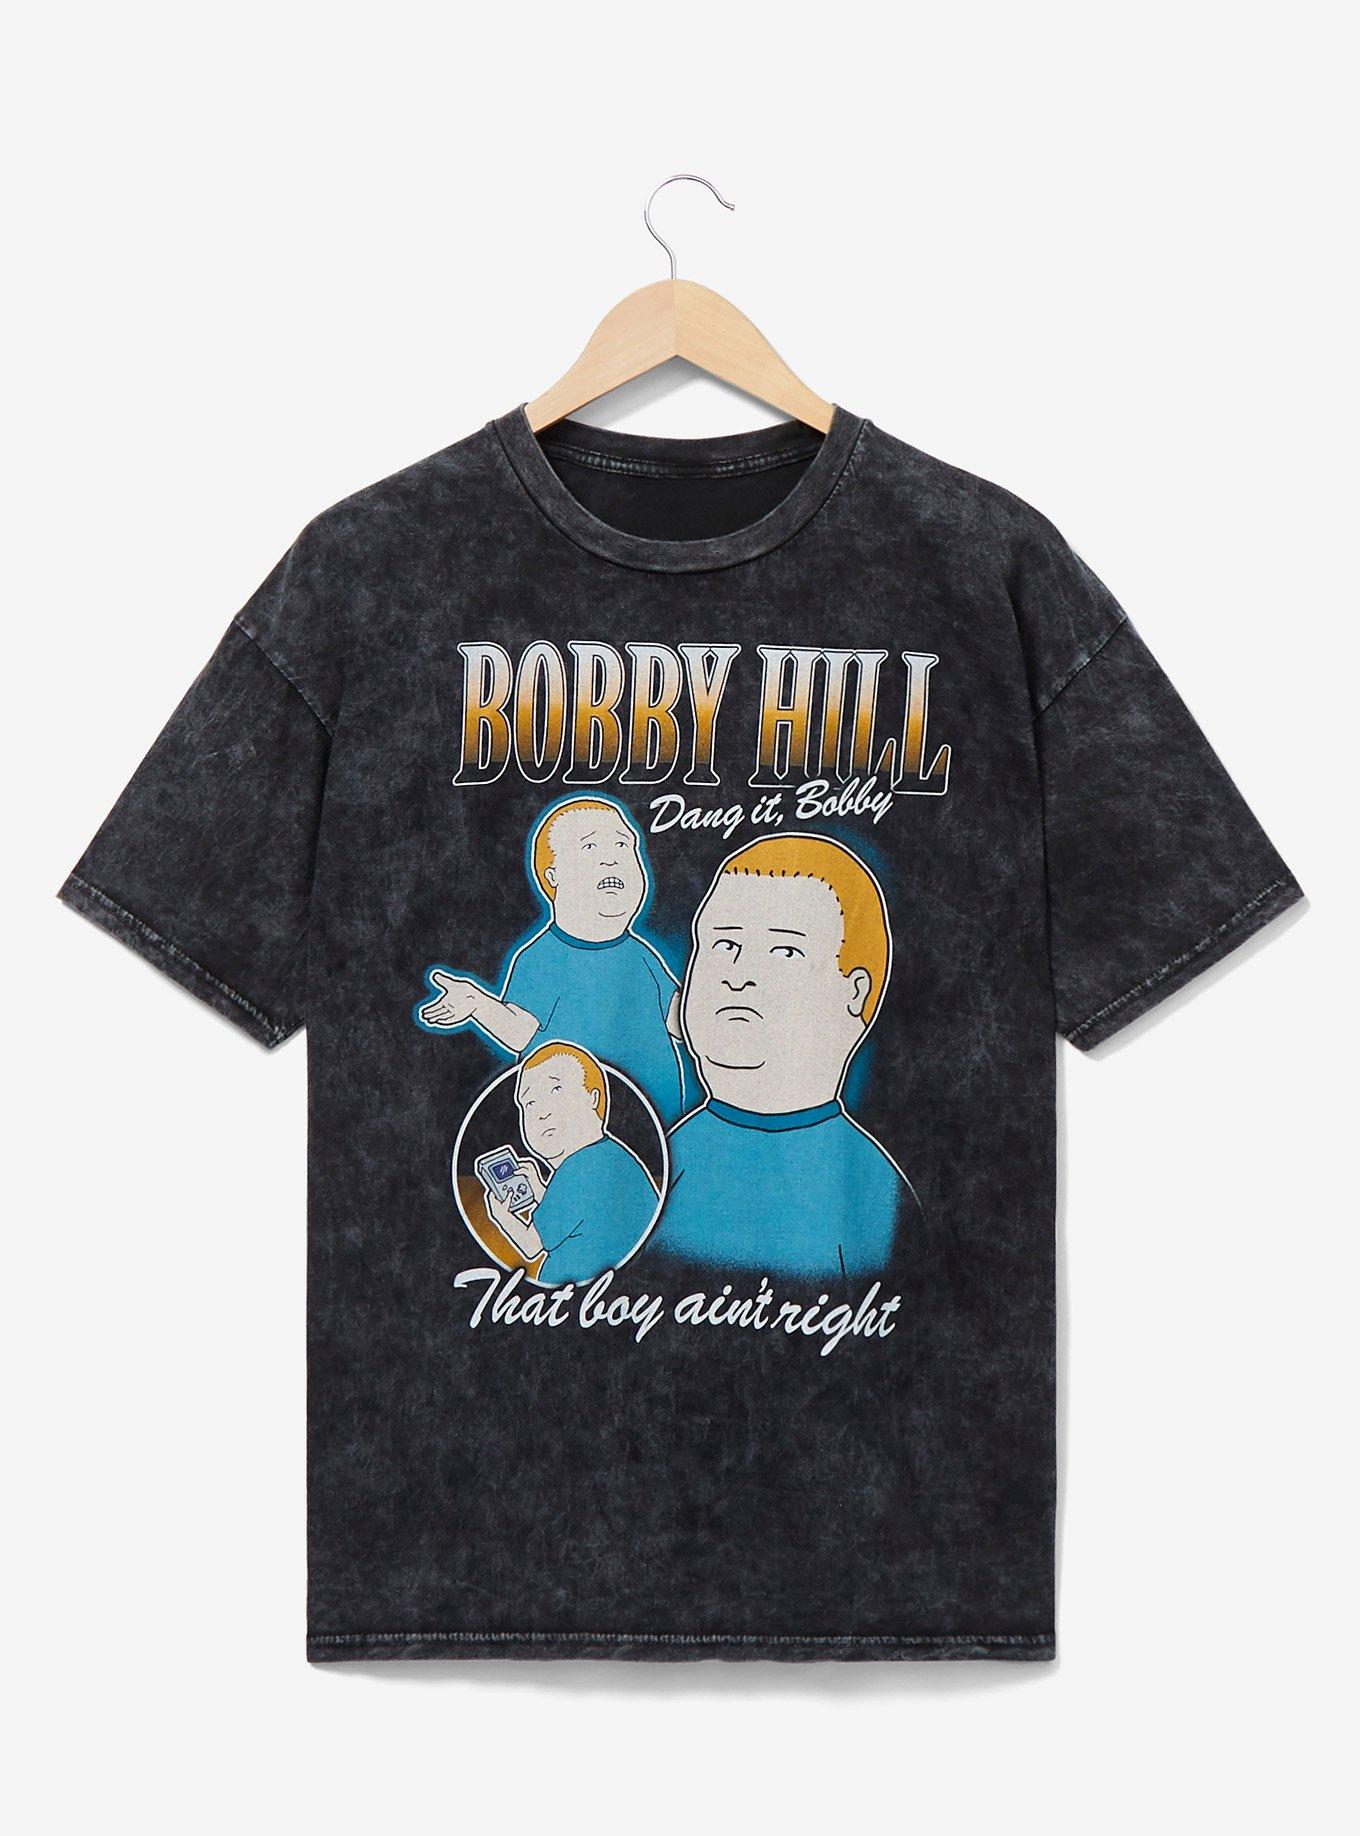 King of The Hill Bobby Hill Retro Portrait T-Shirt - BoxLunch Exclusive, BLACK MINERAL WASH, hi-res